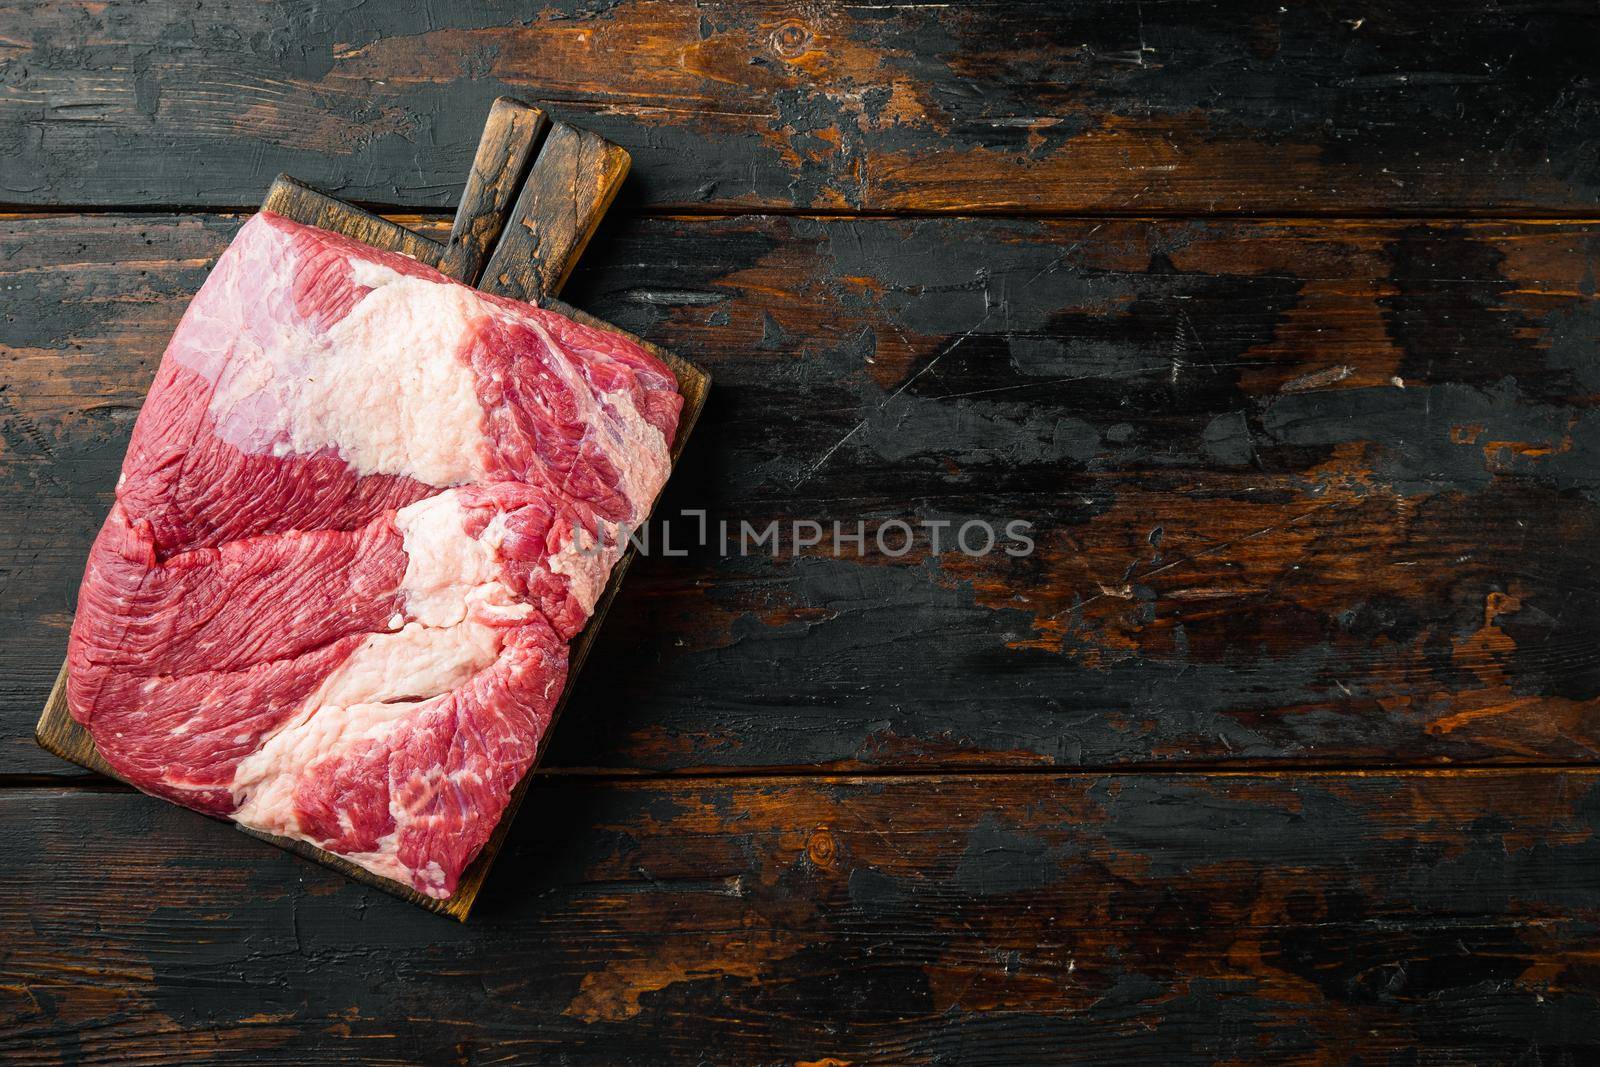 Raw brisket beef cut. Black Angus beef, on old dark wooden table background, top view flat lay, with copy space for text by Ilianesolenyi